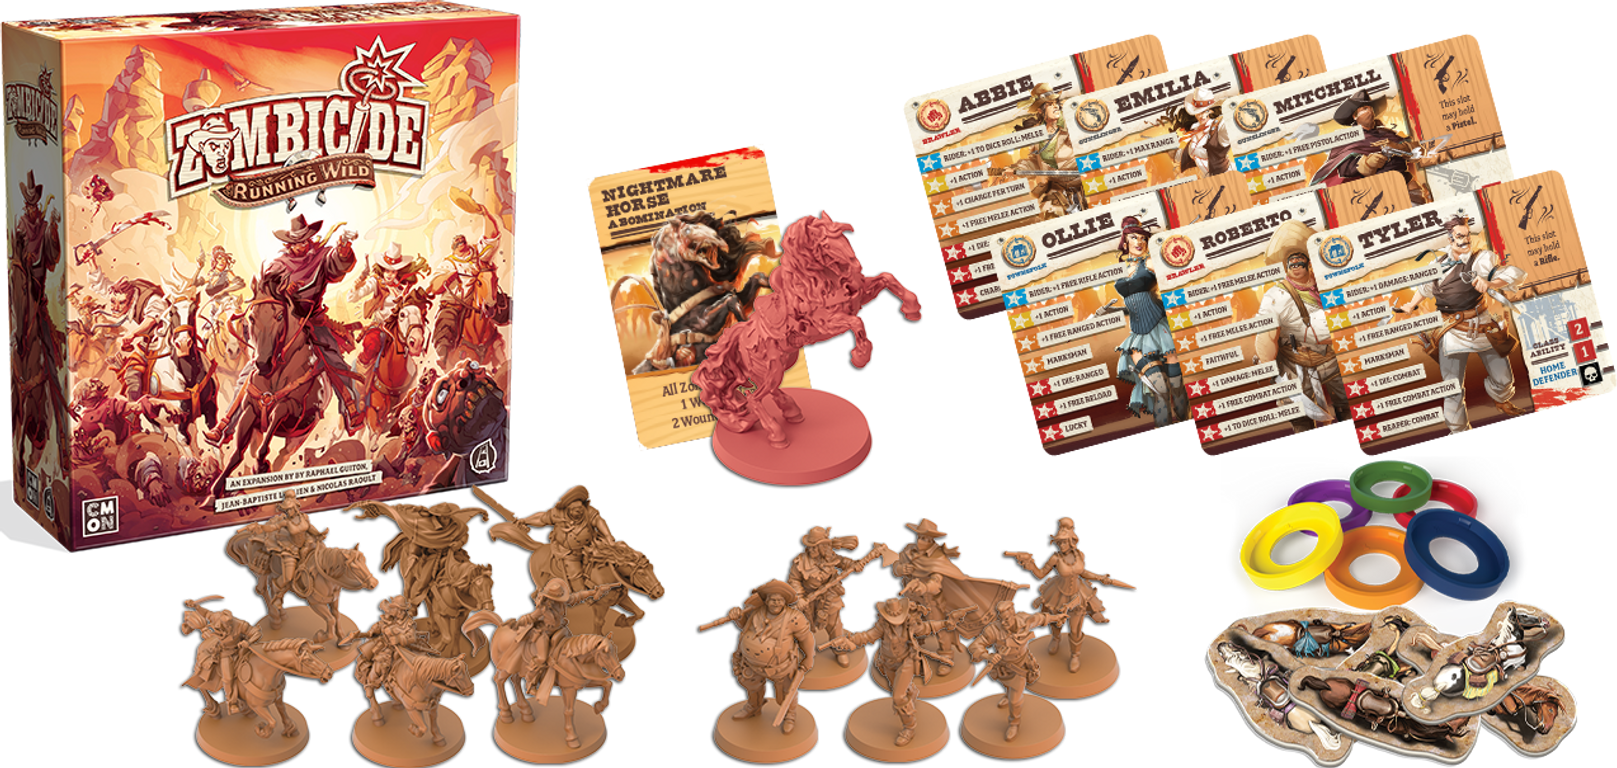 Zombicide: Undead or Alive – Running Wild components